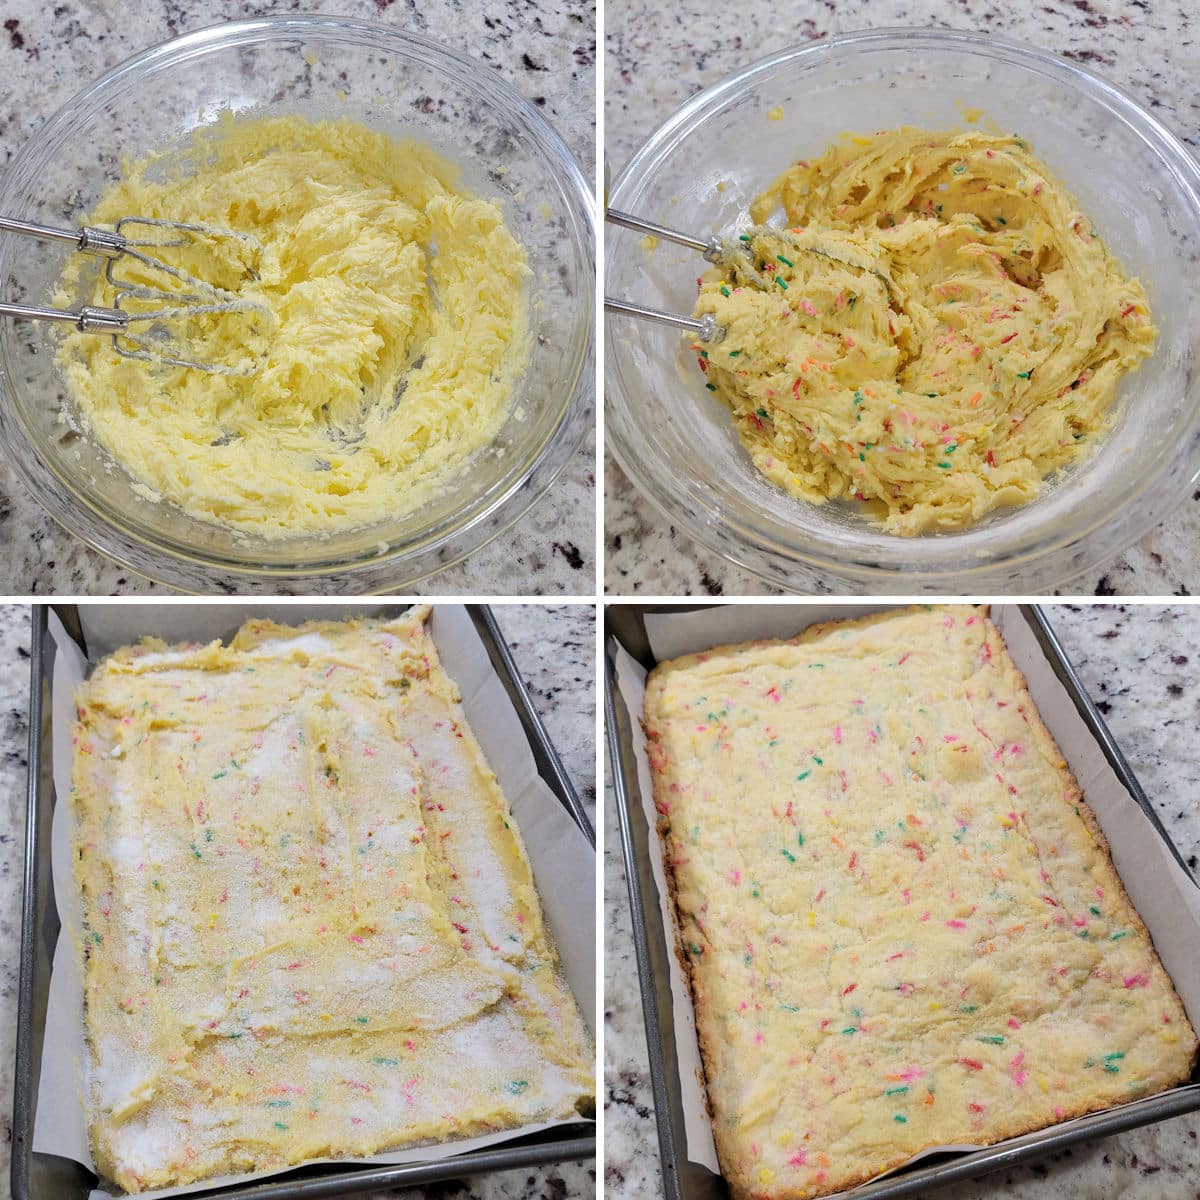 Making funfetti sugar cookie batter and baking in a 9x13 pan.